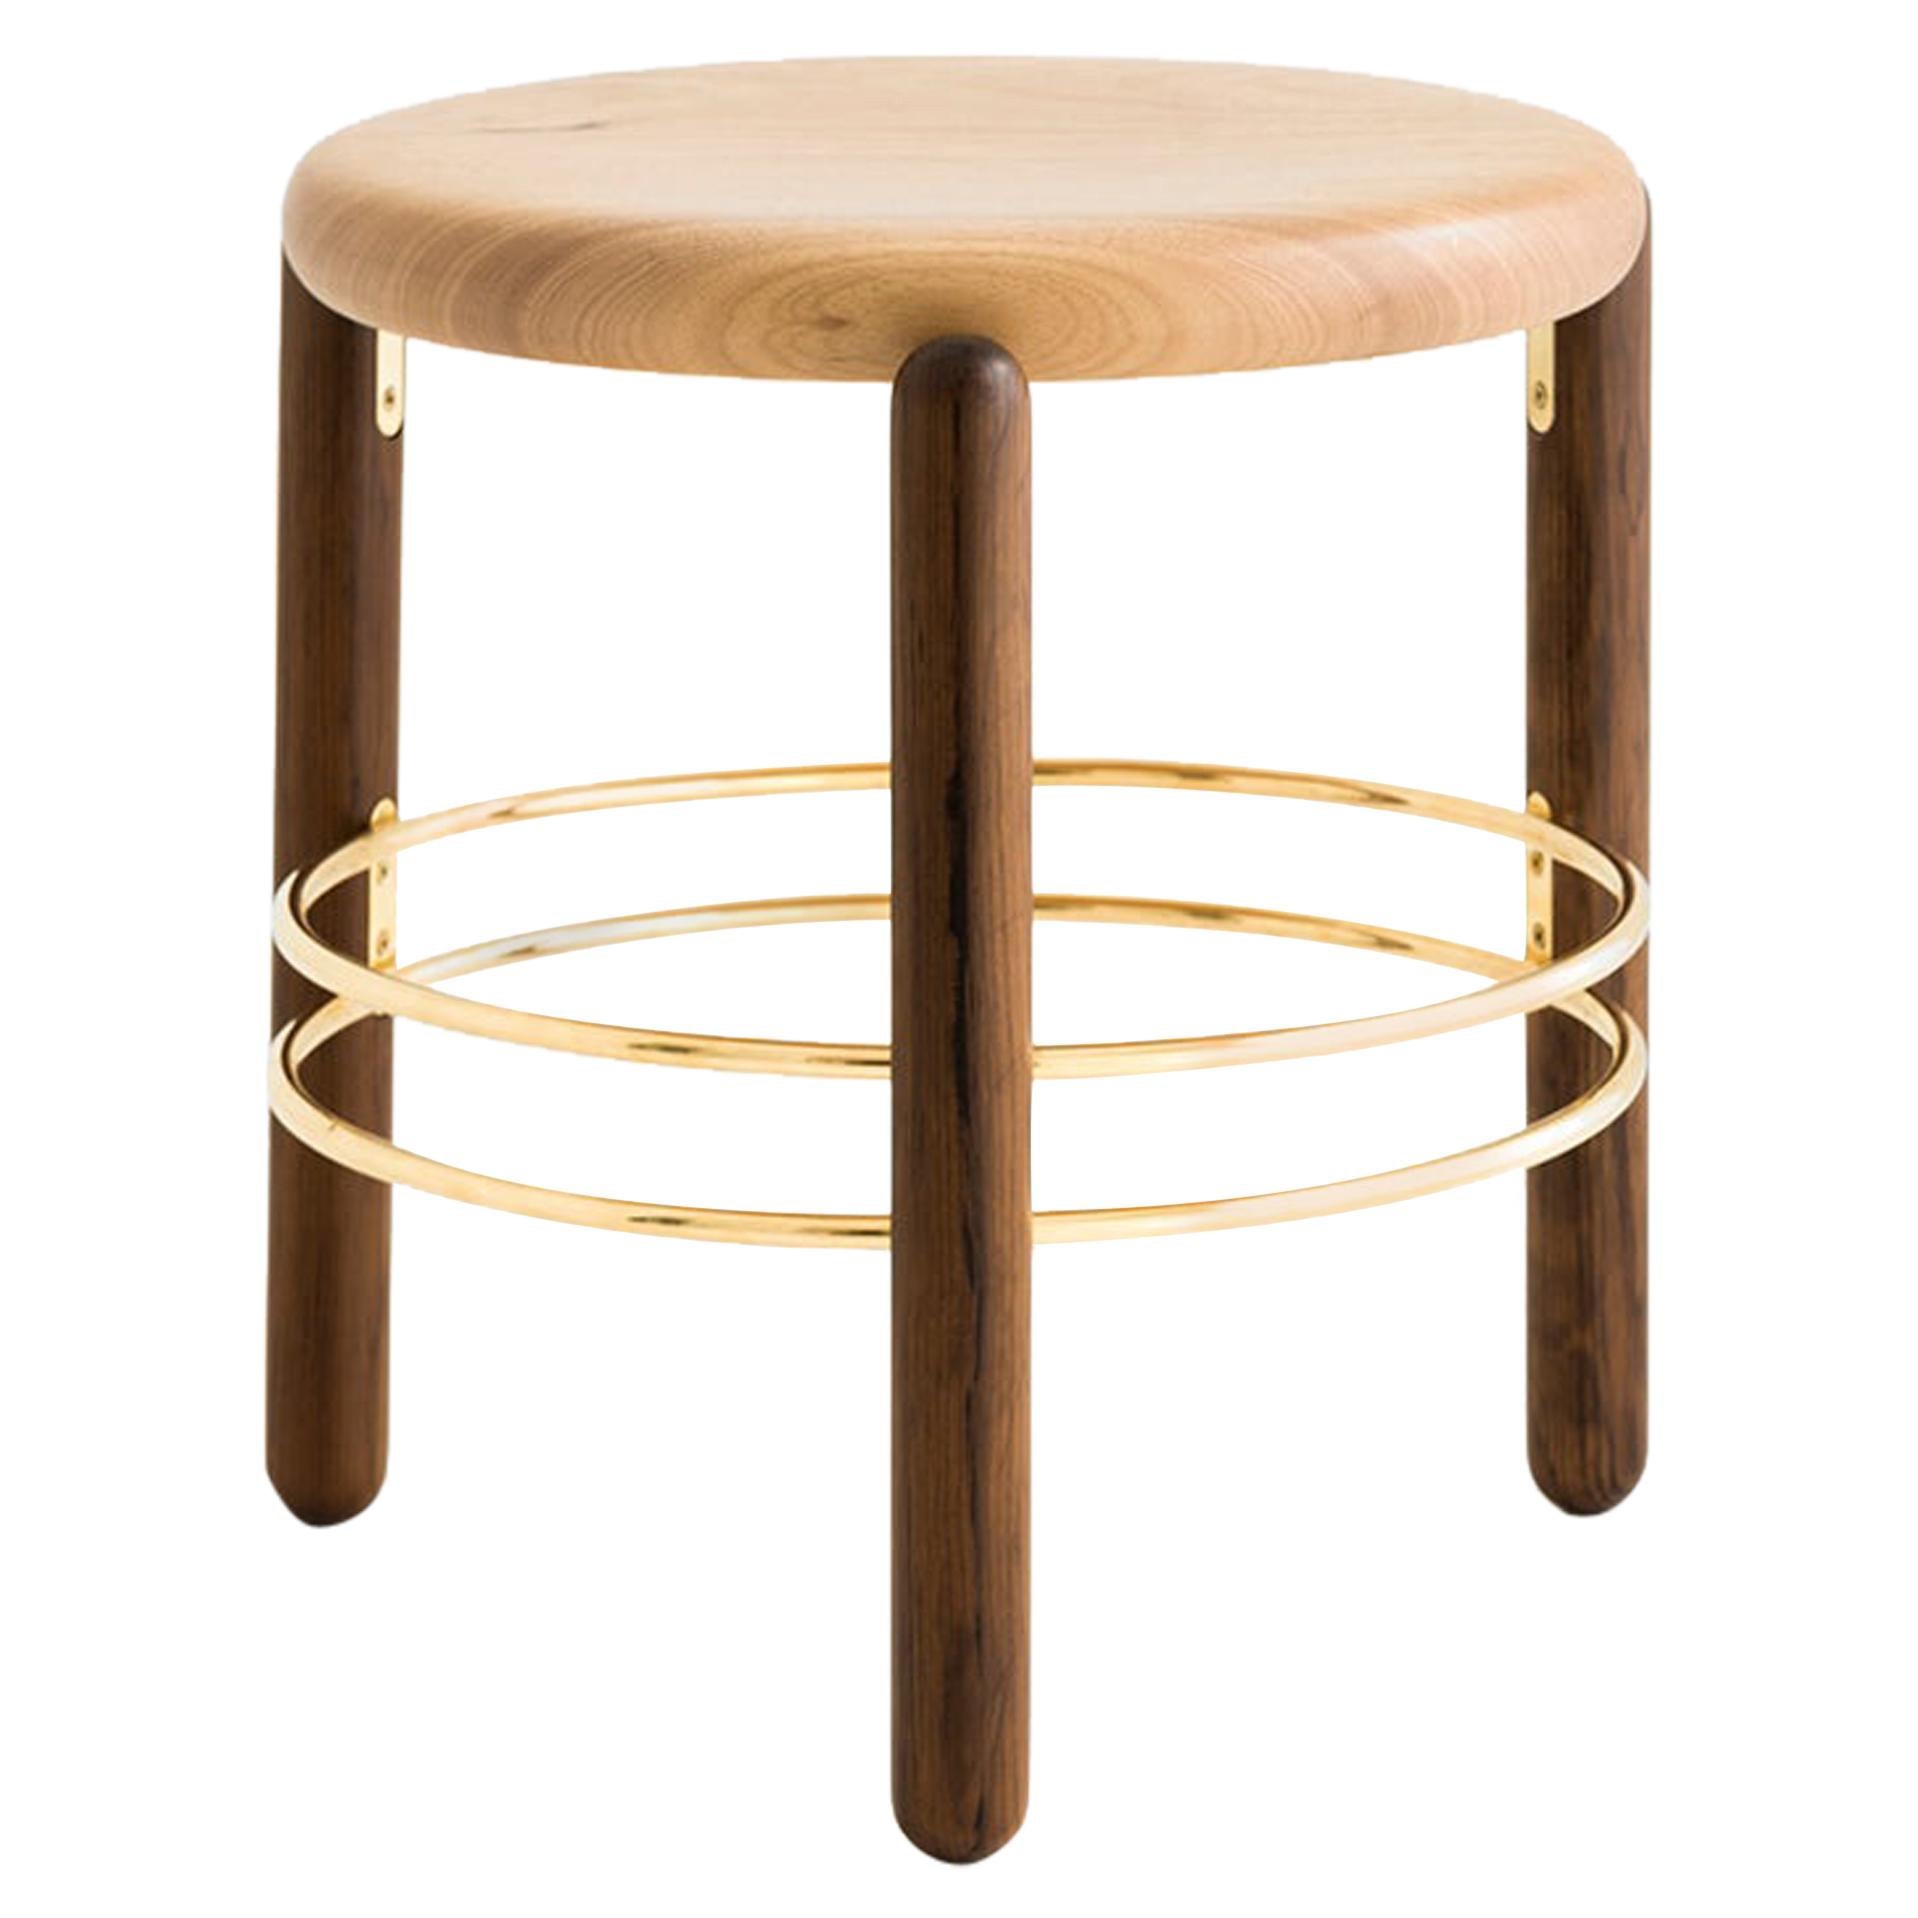 Brass and Wood Sculpted Stool by Leandro Garcia Contemporary Brazil Design For Sale